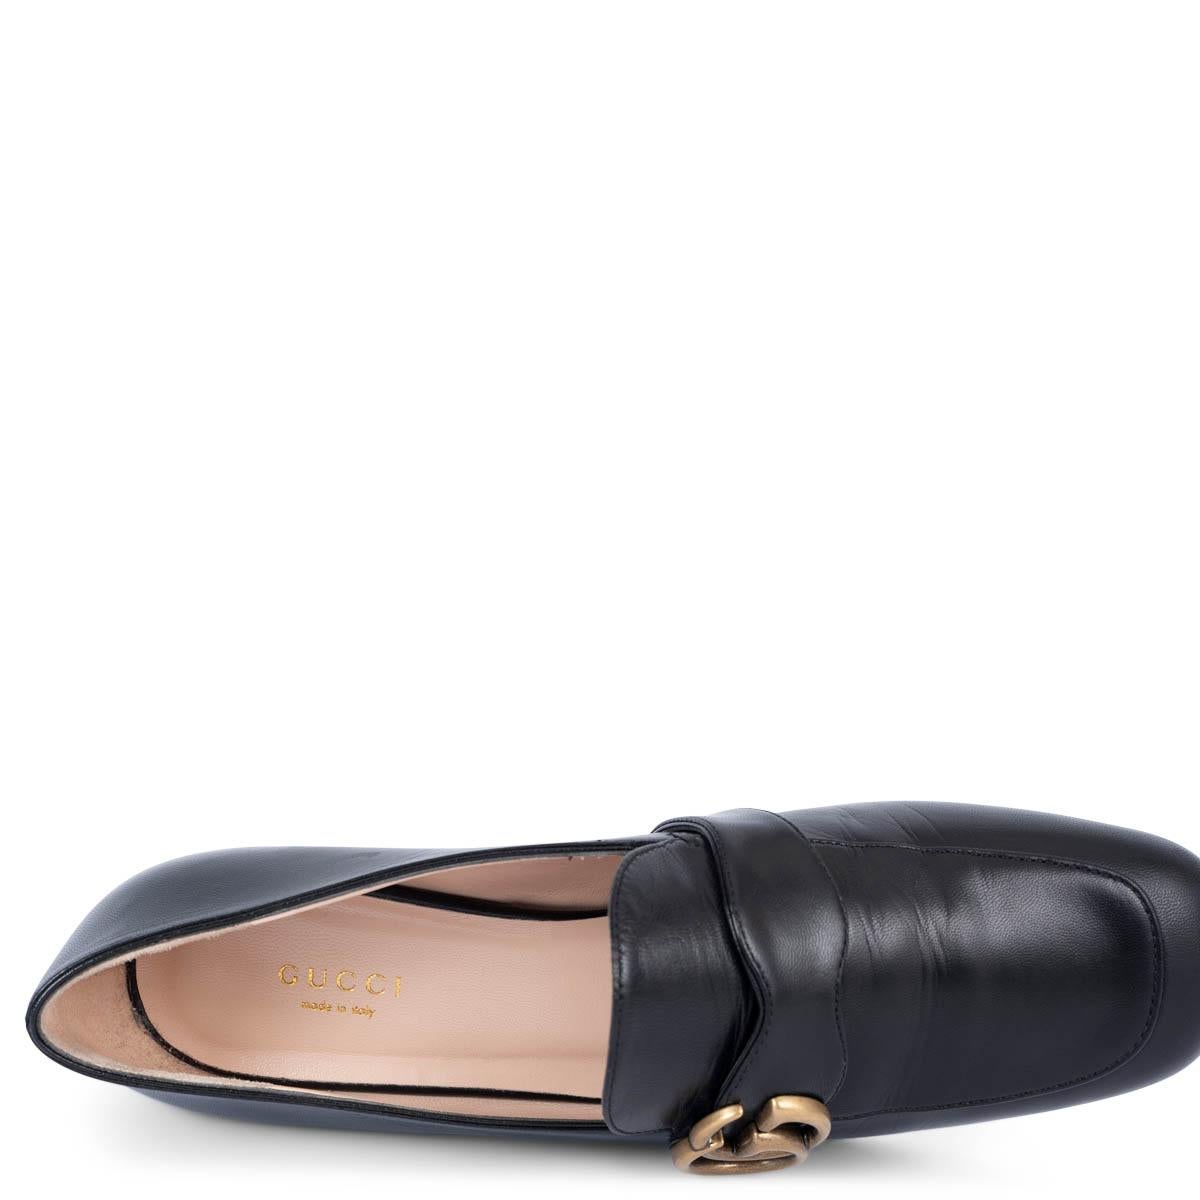 GUCCI black leather GG MARMONT Loafers Shoes 38 3